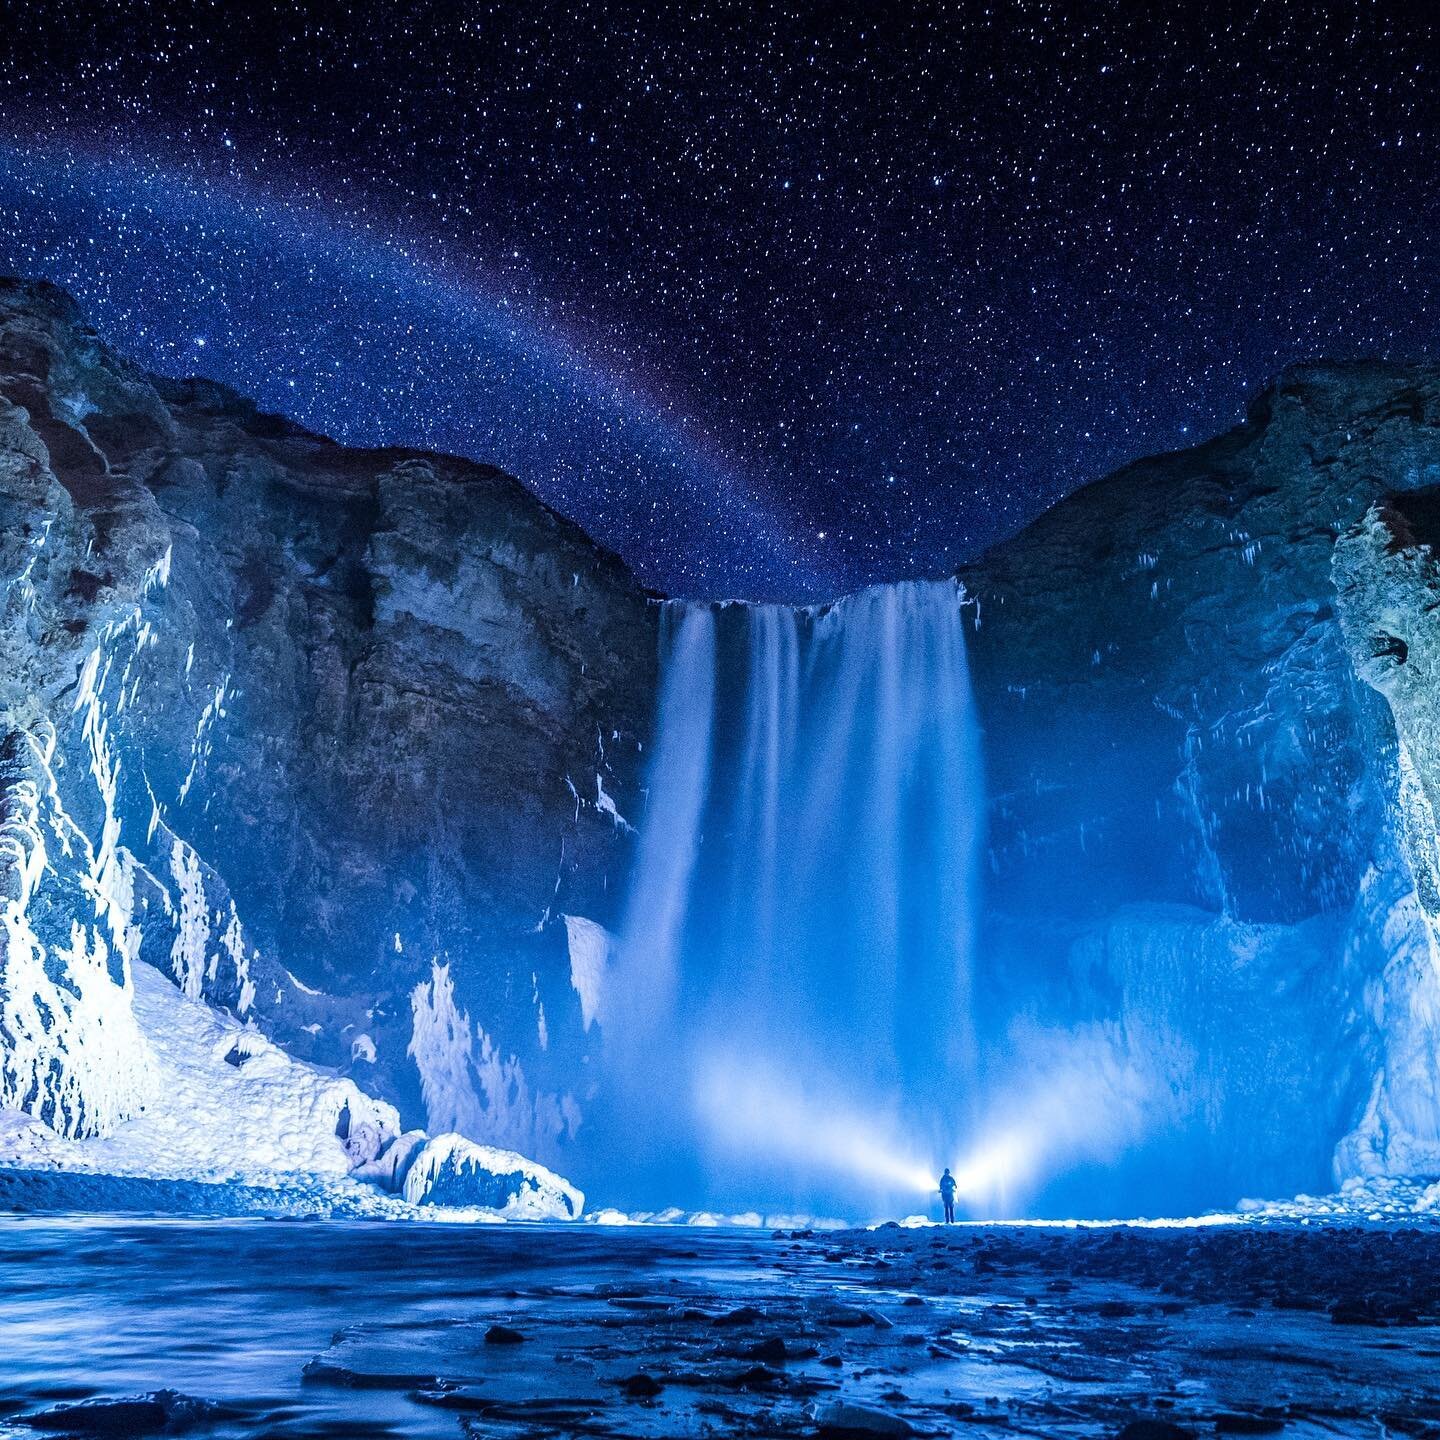 Our finance manager Liv is dreaming of the day she can travel to Iceland and stargaze under the stunning waterfalls in Skogafoss.
.
#national_travel_australia #iceland #dreaming  #travel  #travelphotography  #ig  #travelgram #nature  #roadtrip #adven